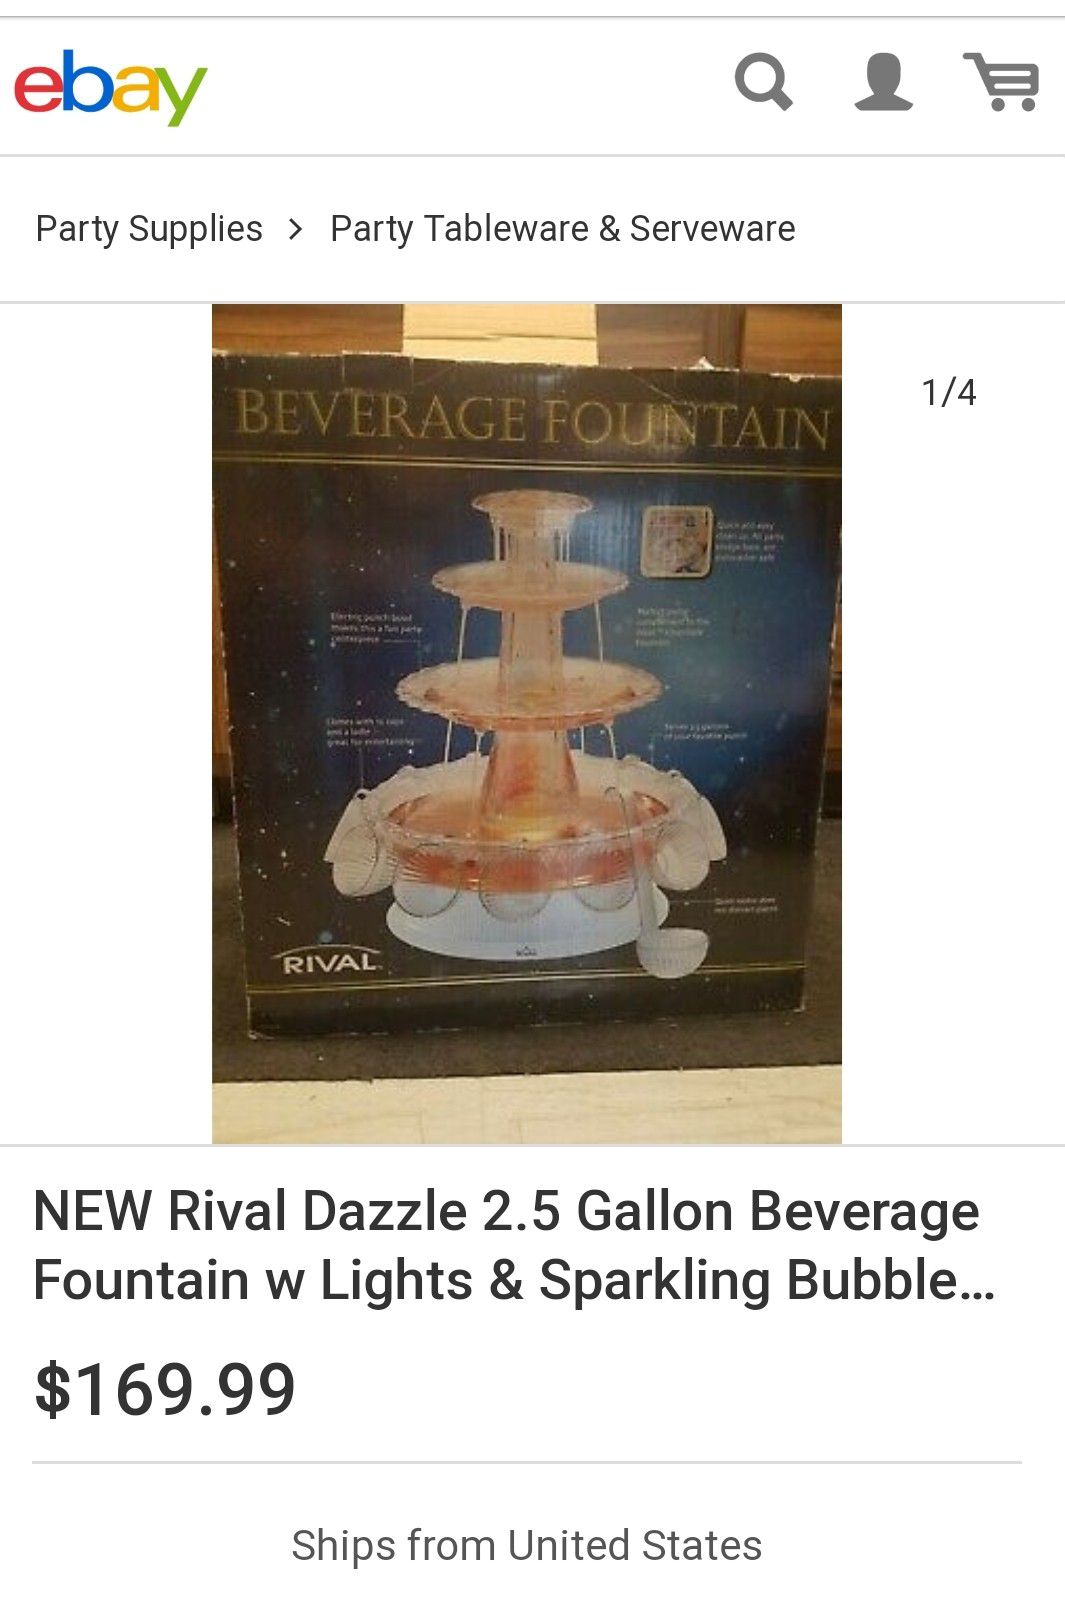 AT HOME ENTERTAINING ELECTRIC BEVERAGE FOUNTAIN (SERVES UP TO 2 1/2 GALLONS OF YOUR FAVORITE PUNCH OR MIXED DRINKS).